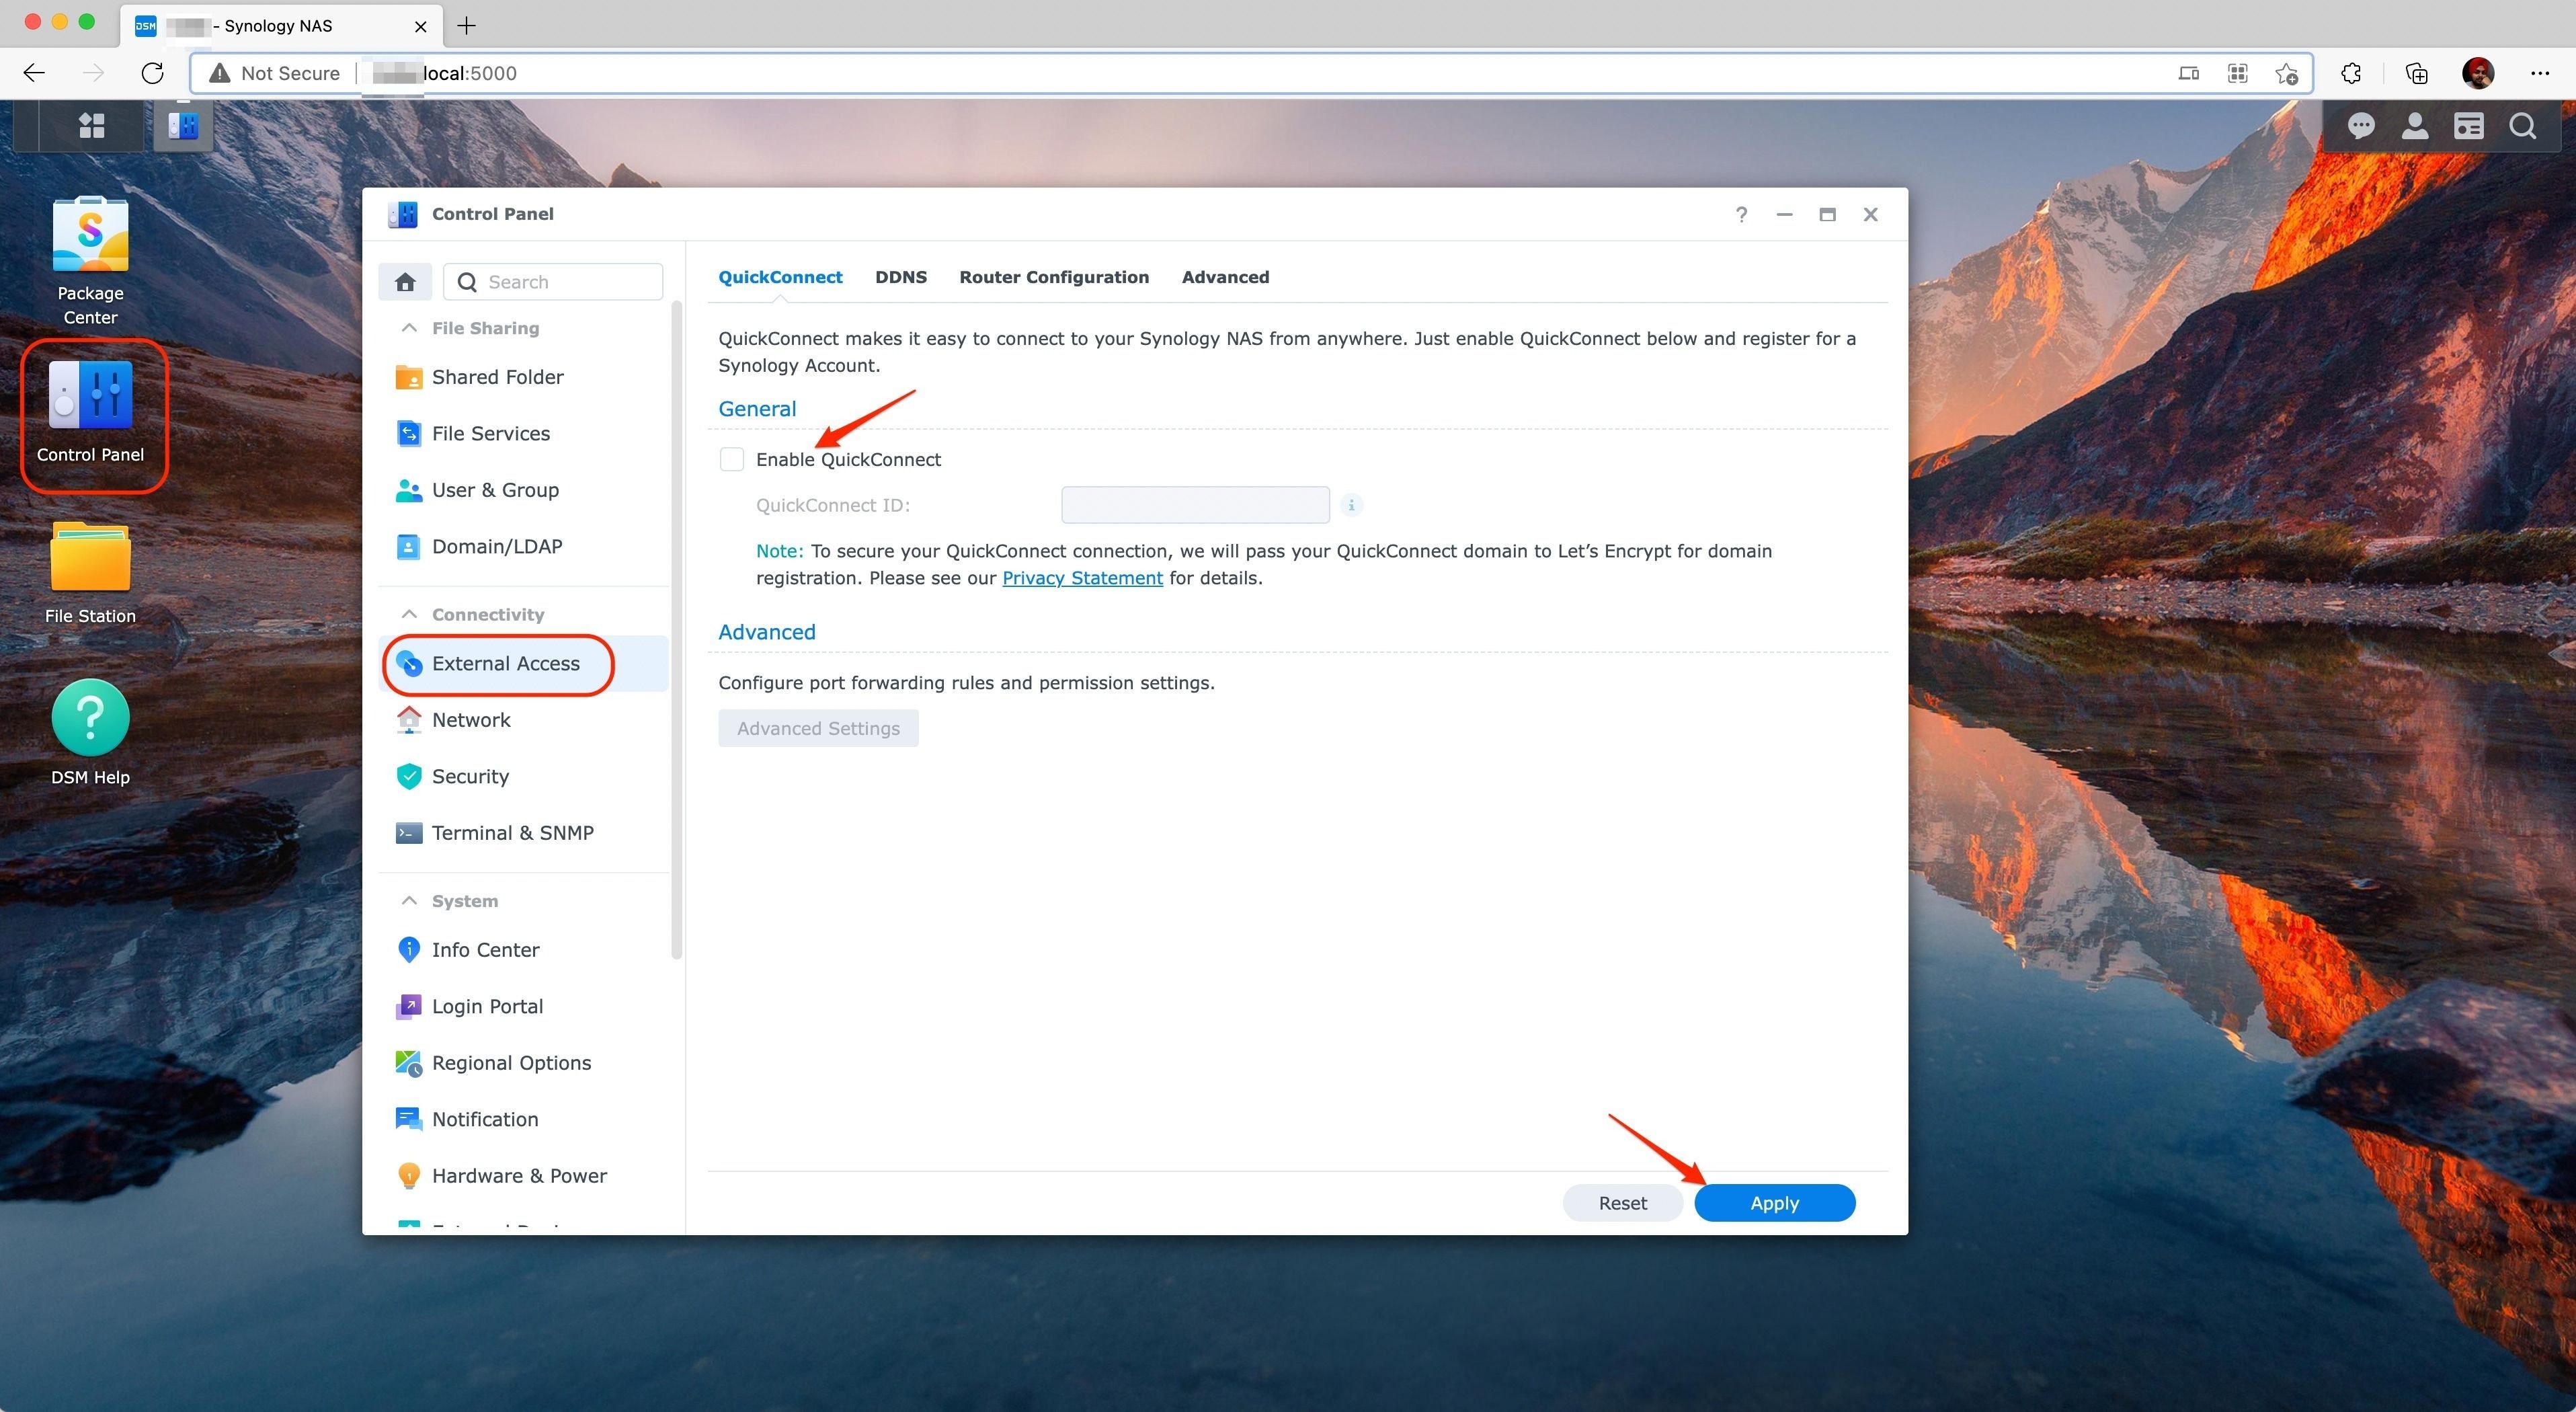 Screenshot shows Synology NAS in a web browser with control panel pop up open. Arrows pointing to 'External Access' and 'Enable Quickconnect'.